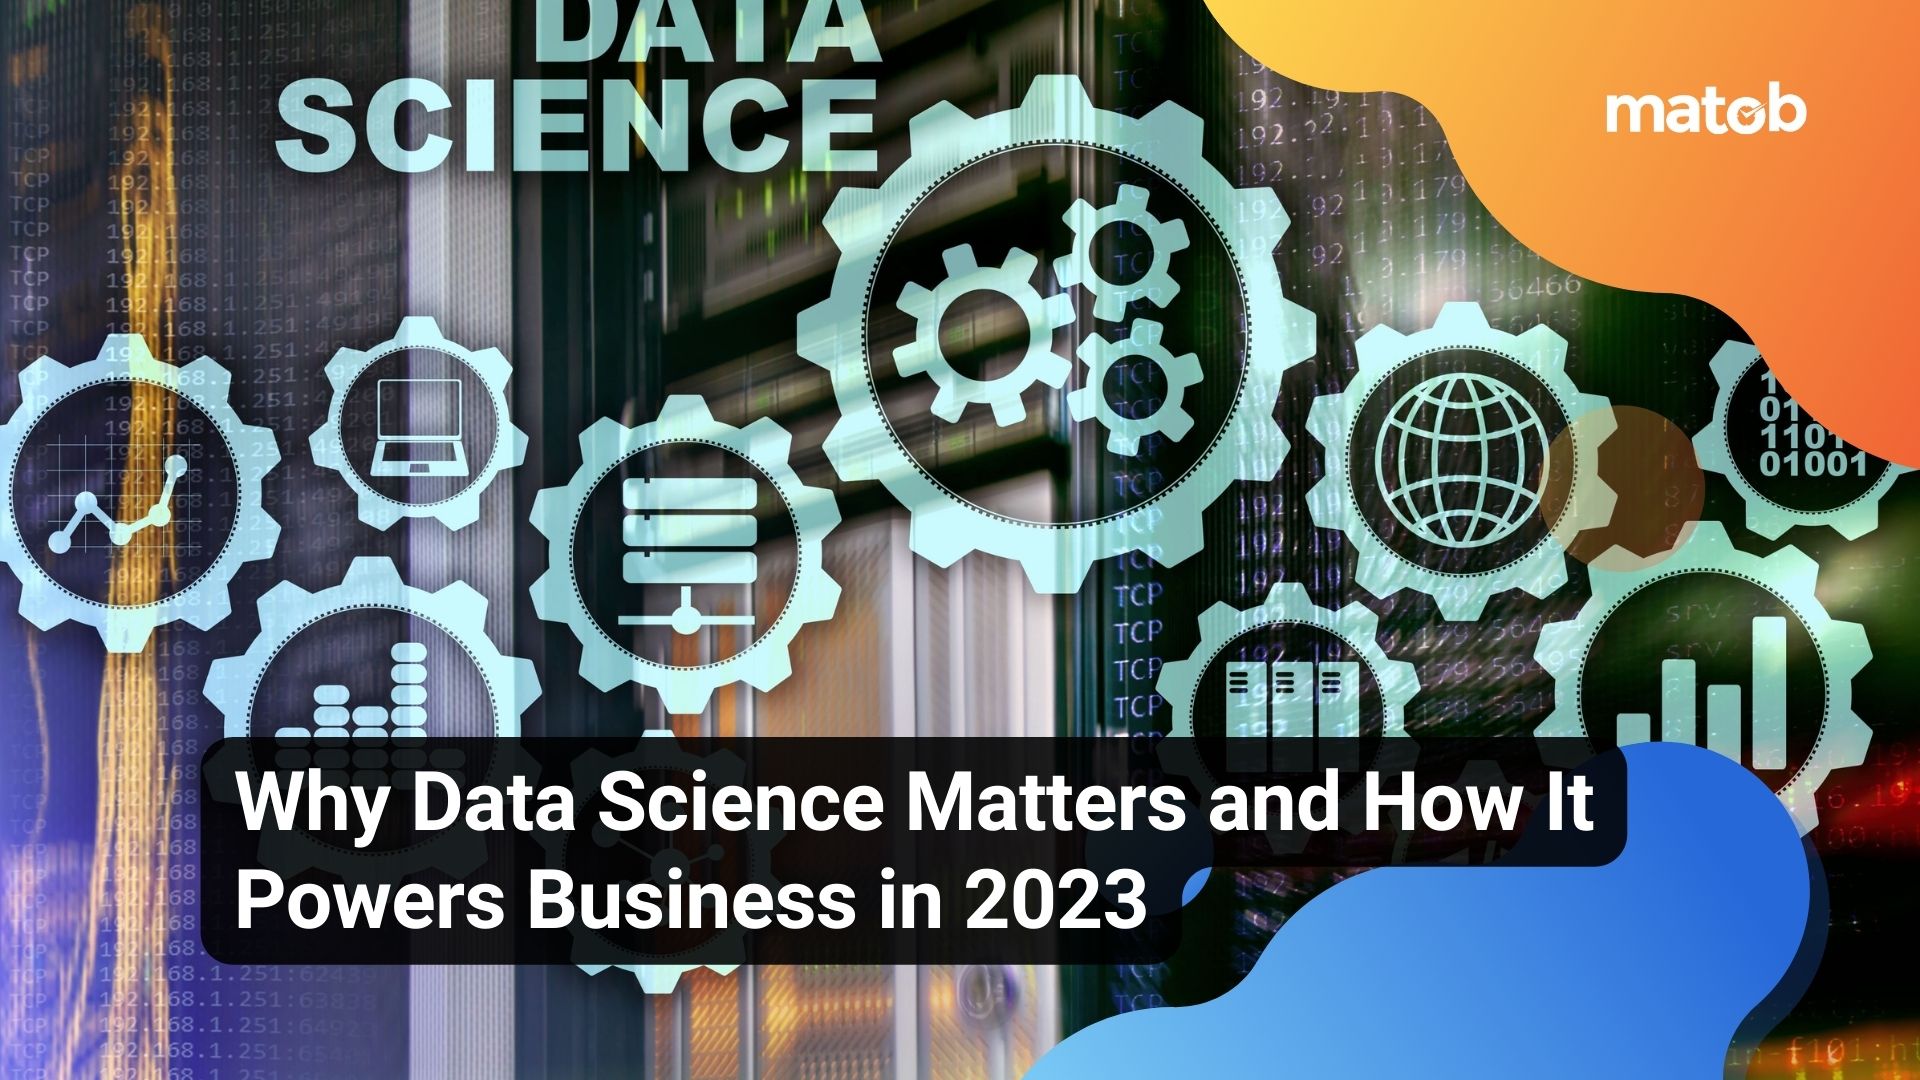 Why Data Science Matters and How It Powers Business in 2023